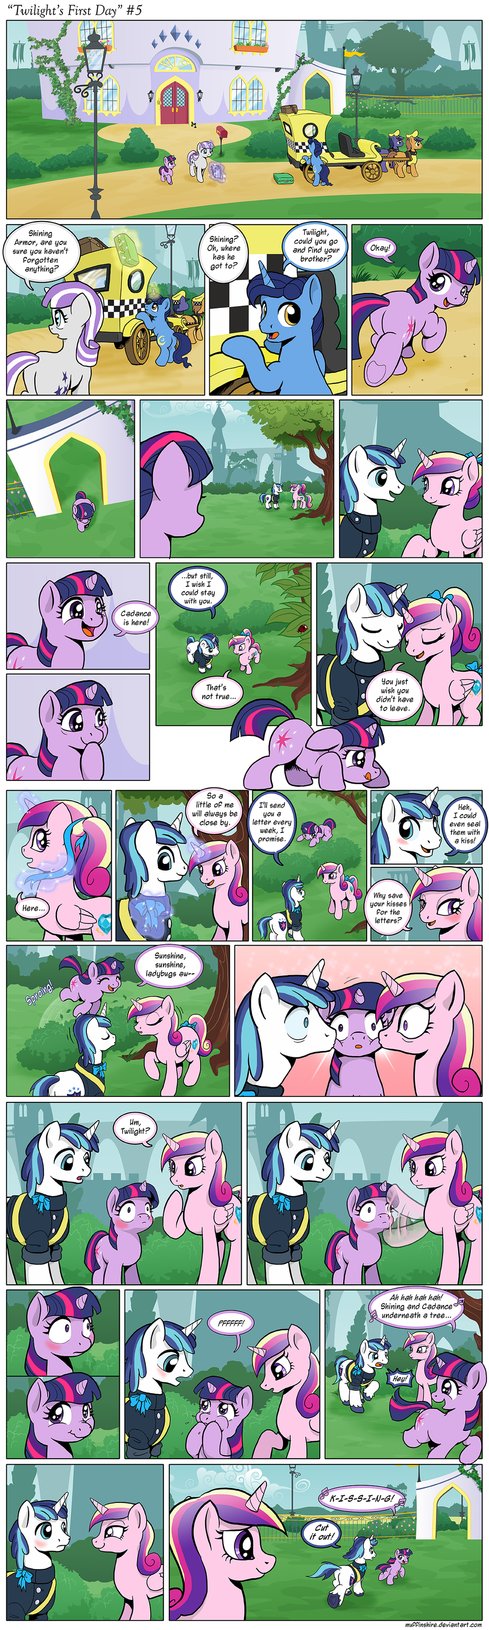 comic___twilight_s_first_day__5_by_muffi